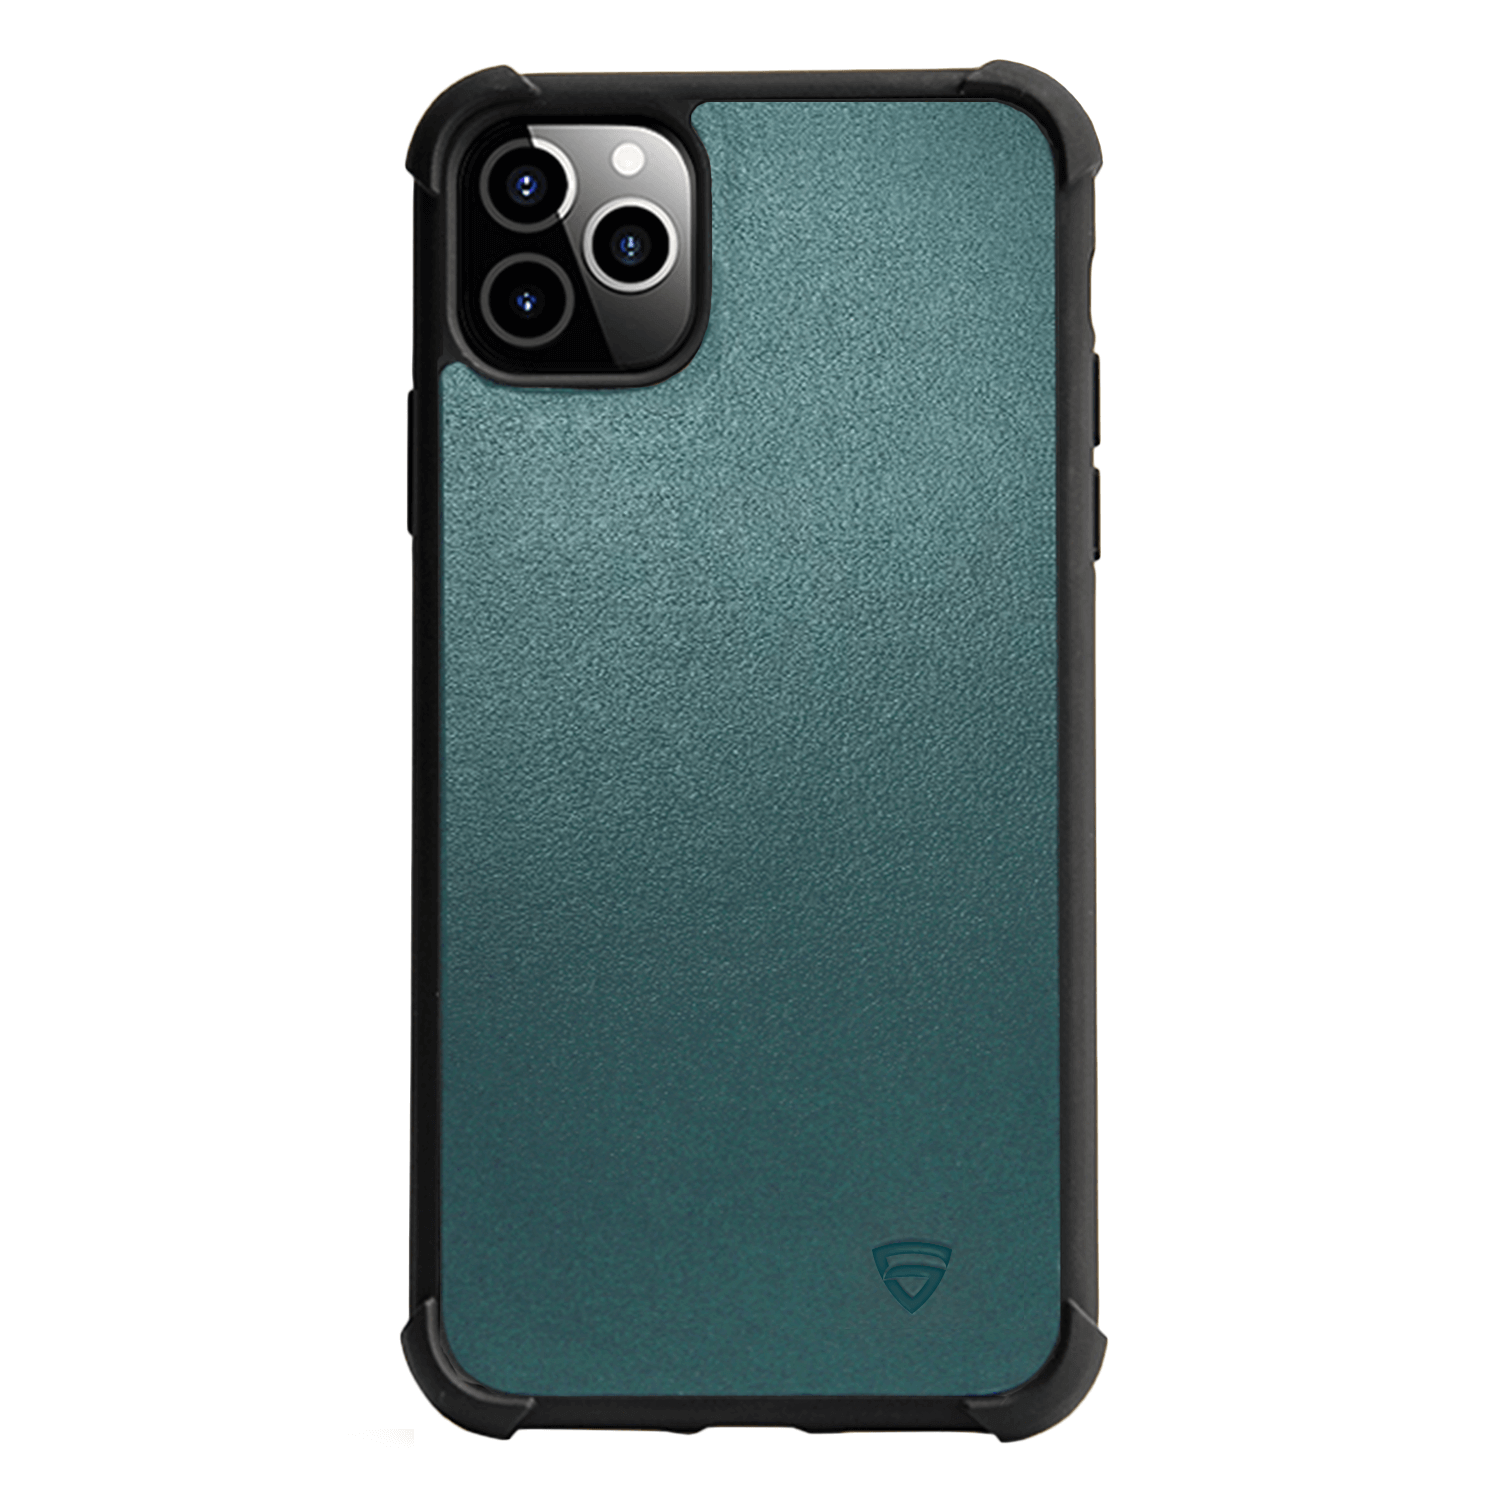 RAEGR iPhone 11 Pro Elements Armor Protective Case/Cover with Genuine Leather